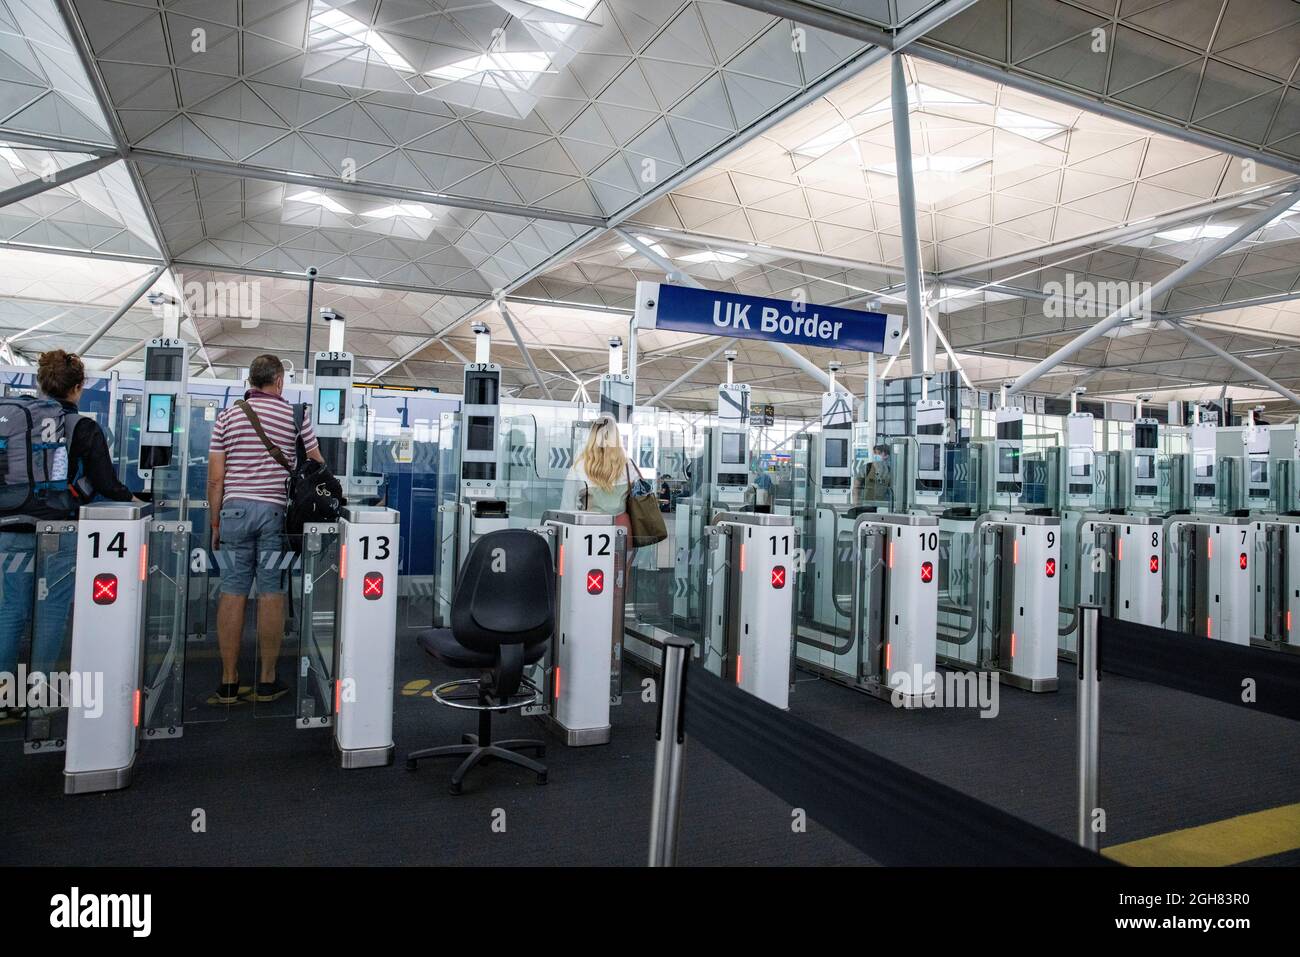 Passengers arriving from Italy at the UK Border entrance at Stansted airport.Italy is on the Amber list. Passengers must supply a test result and PLF. Stock Photo